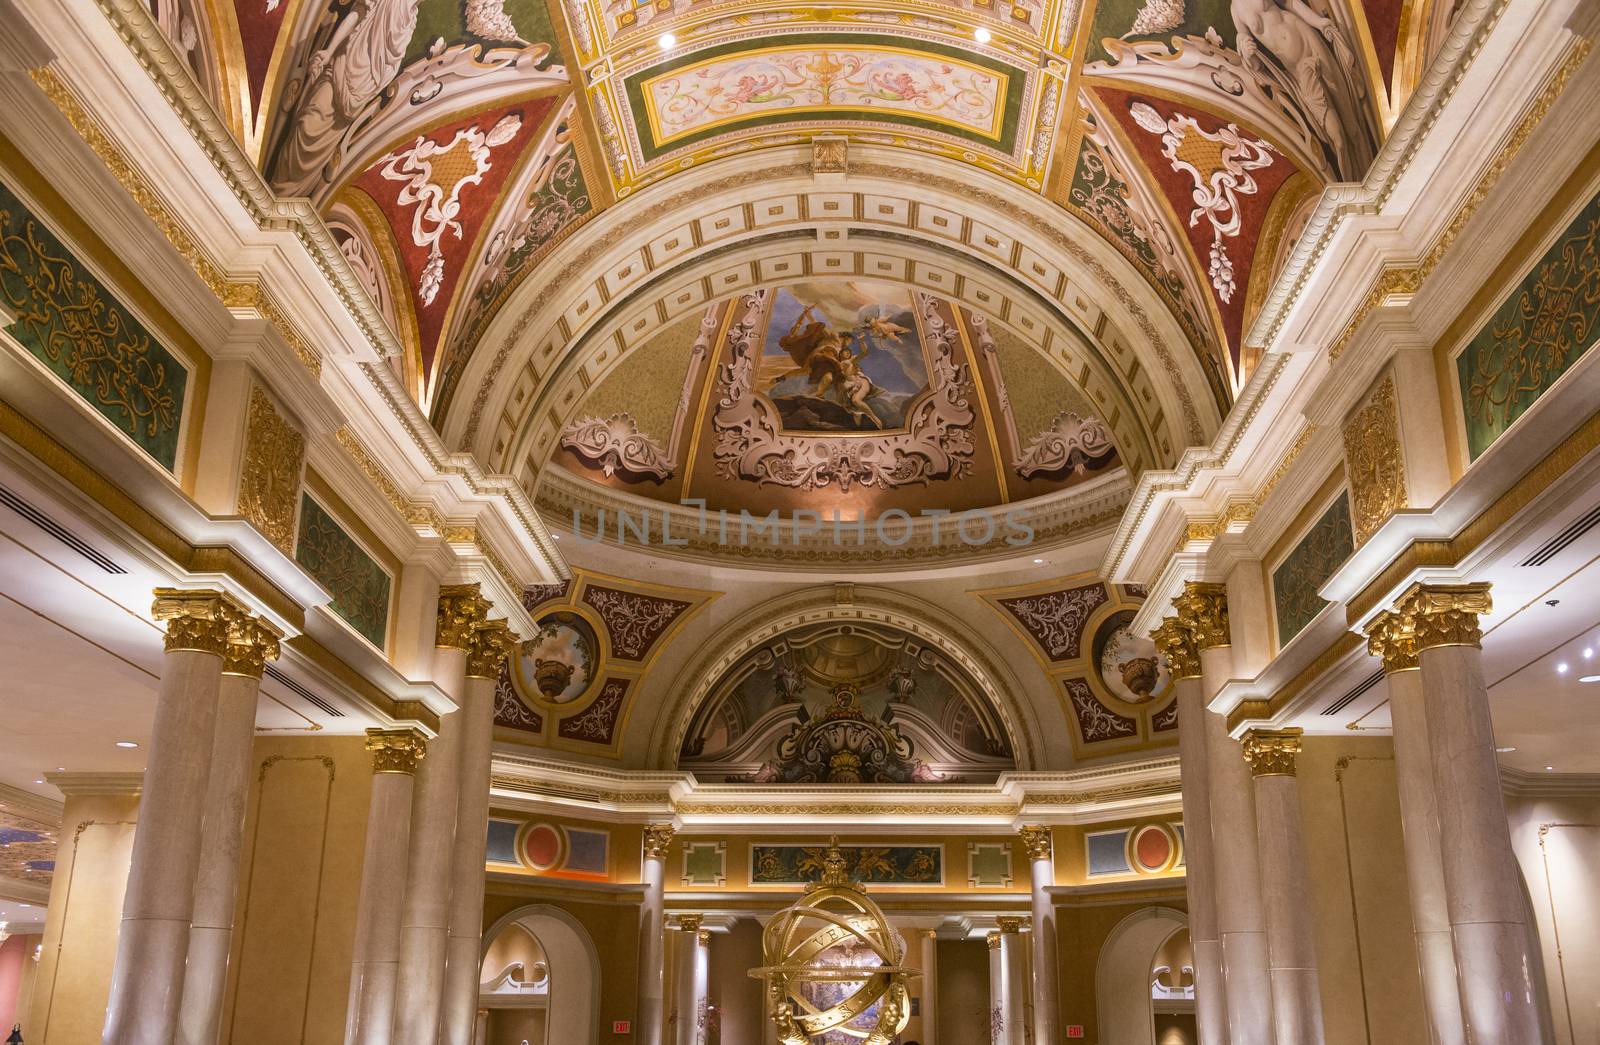 LAS VEGAS - NOV 15 : The interior of the Venetian hotel & Casino in Las Vegas on November 15, 2013. With more than 4000 suites it's one of the most famous hotels in the world.